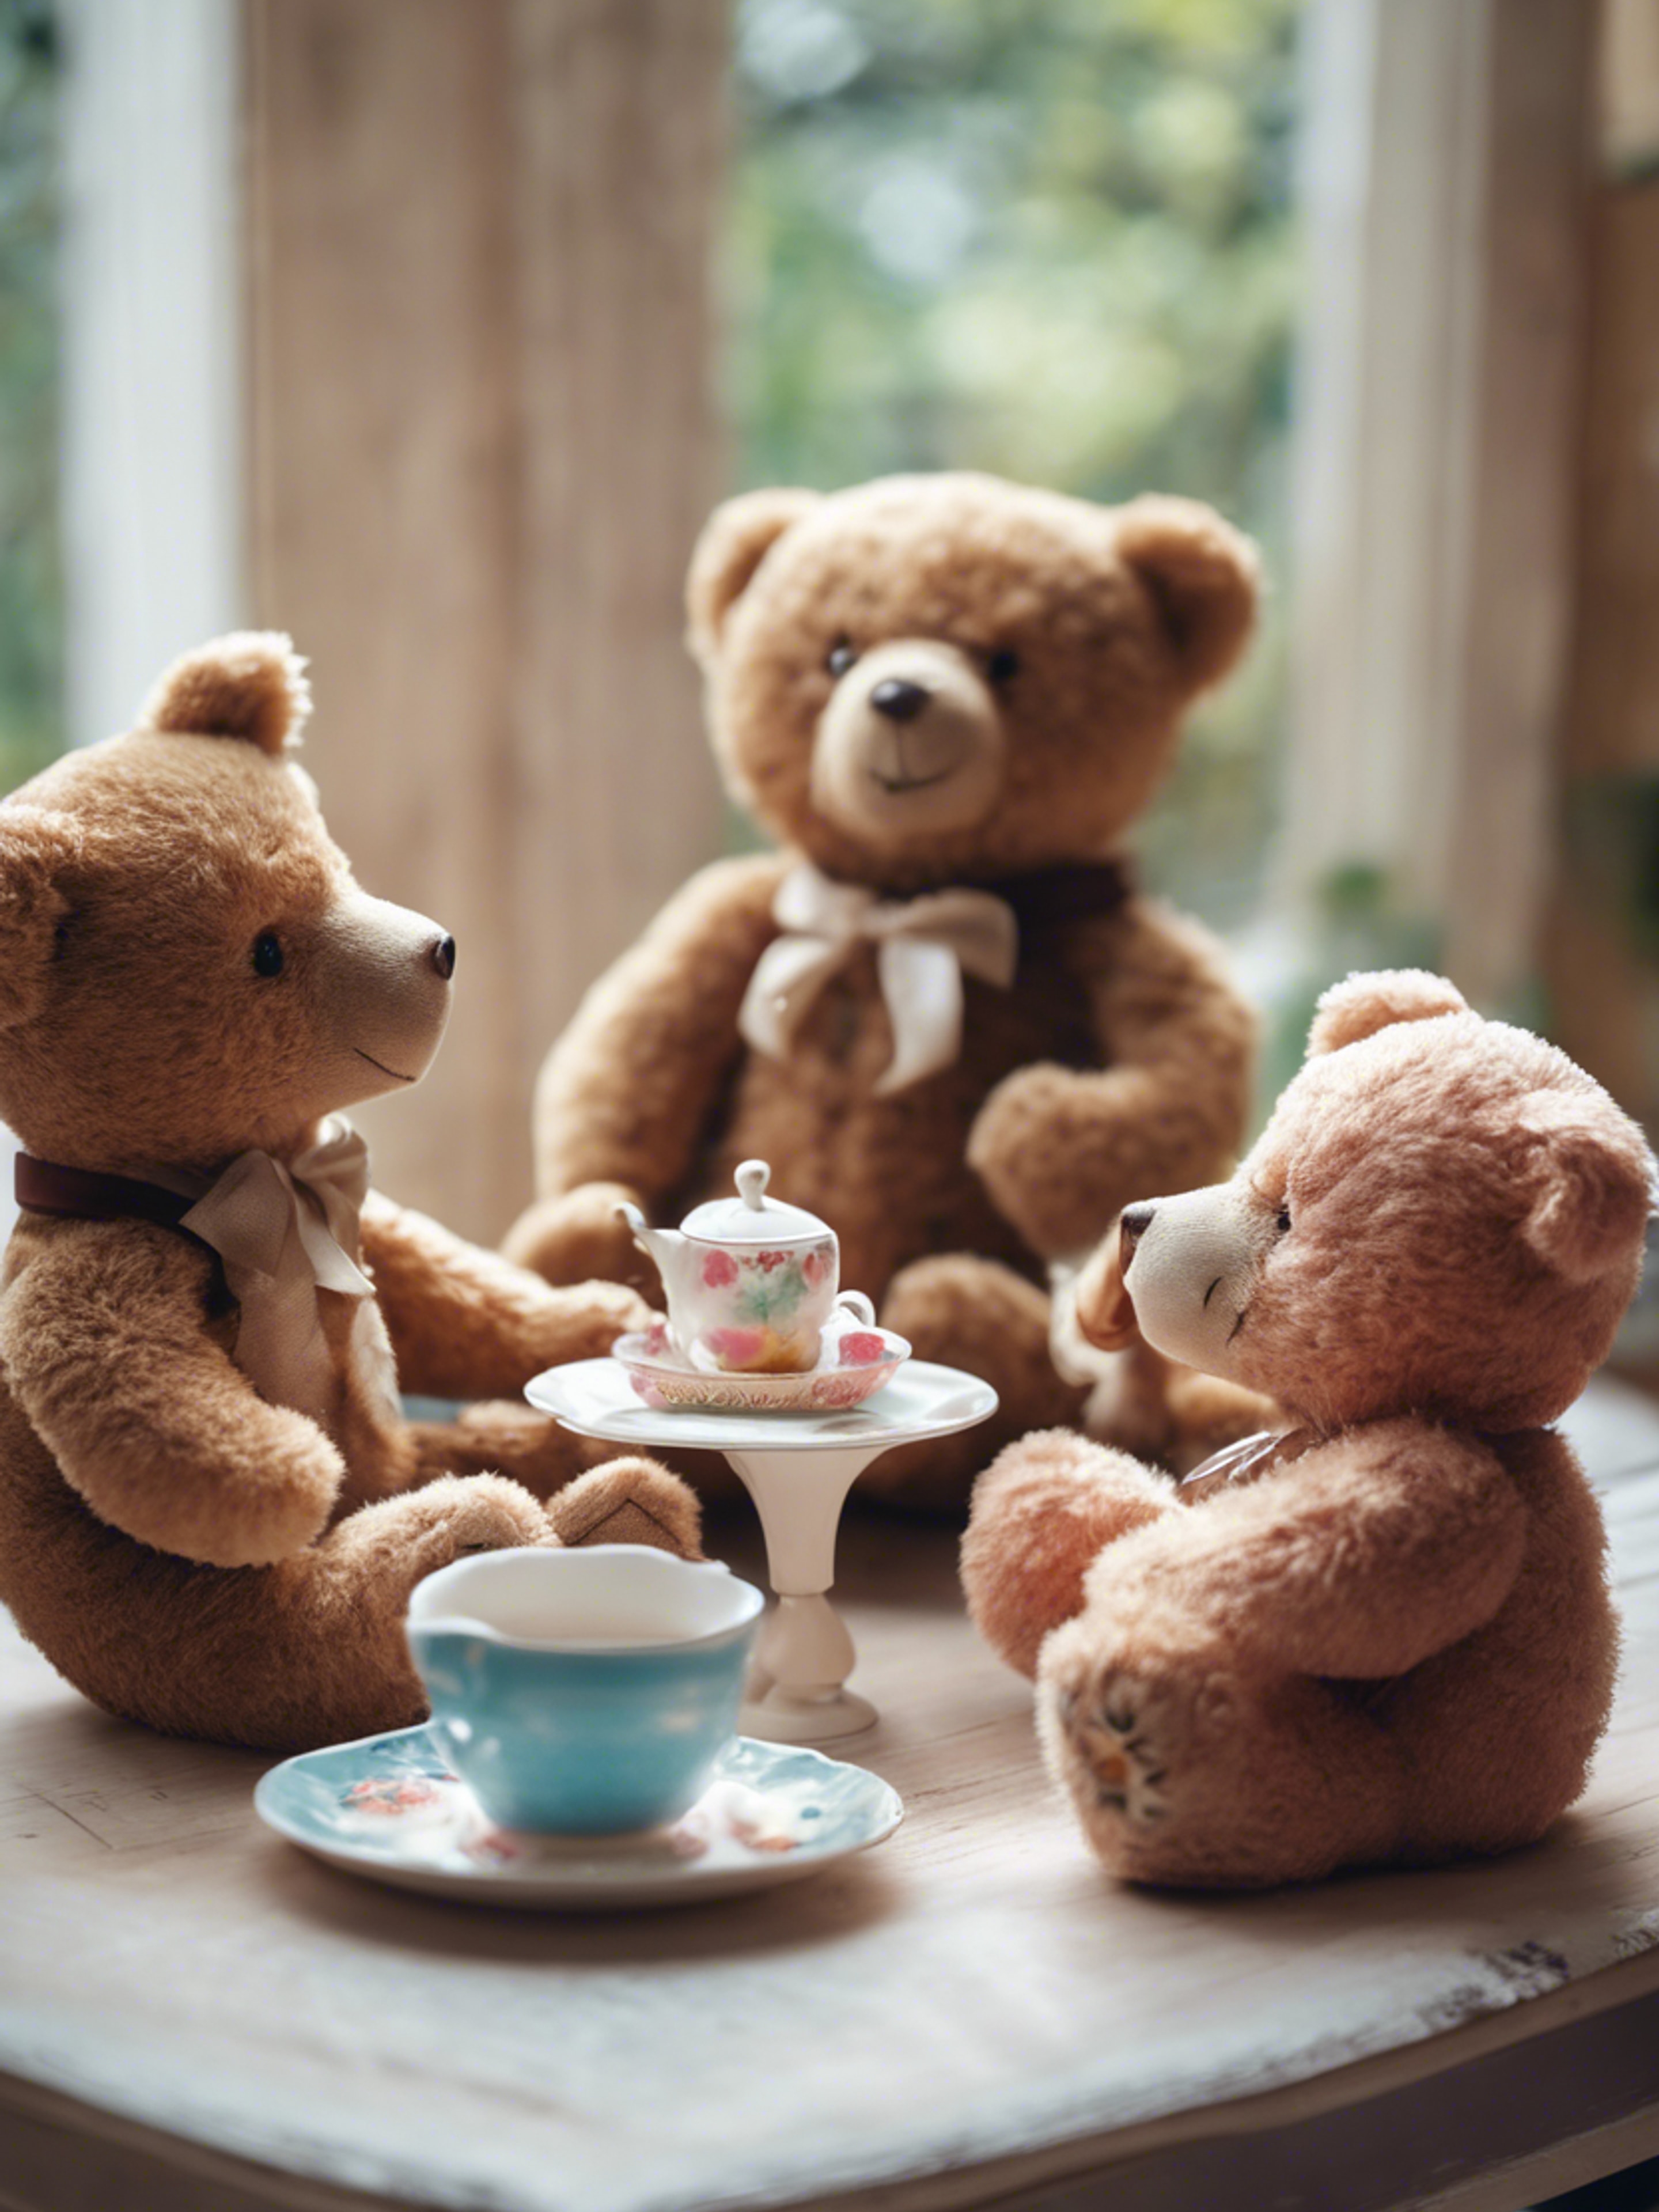 A group of teddy bears having a playful tea party in a child's room. Tapet[5c3b9dbbb3984ccebf50]